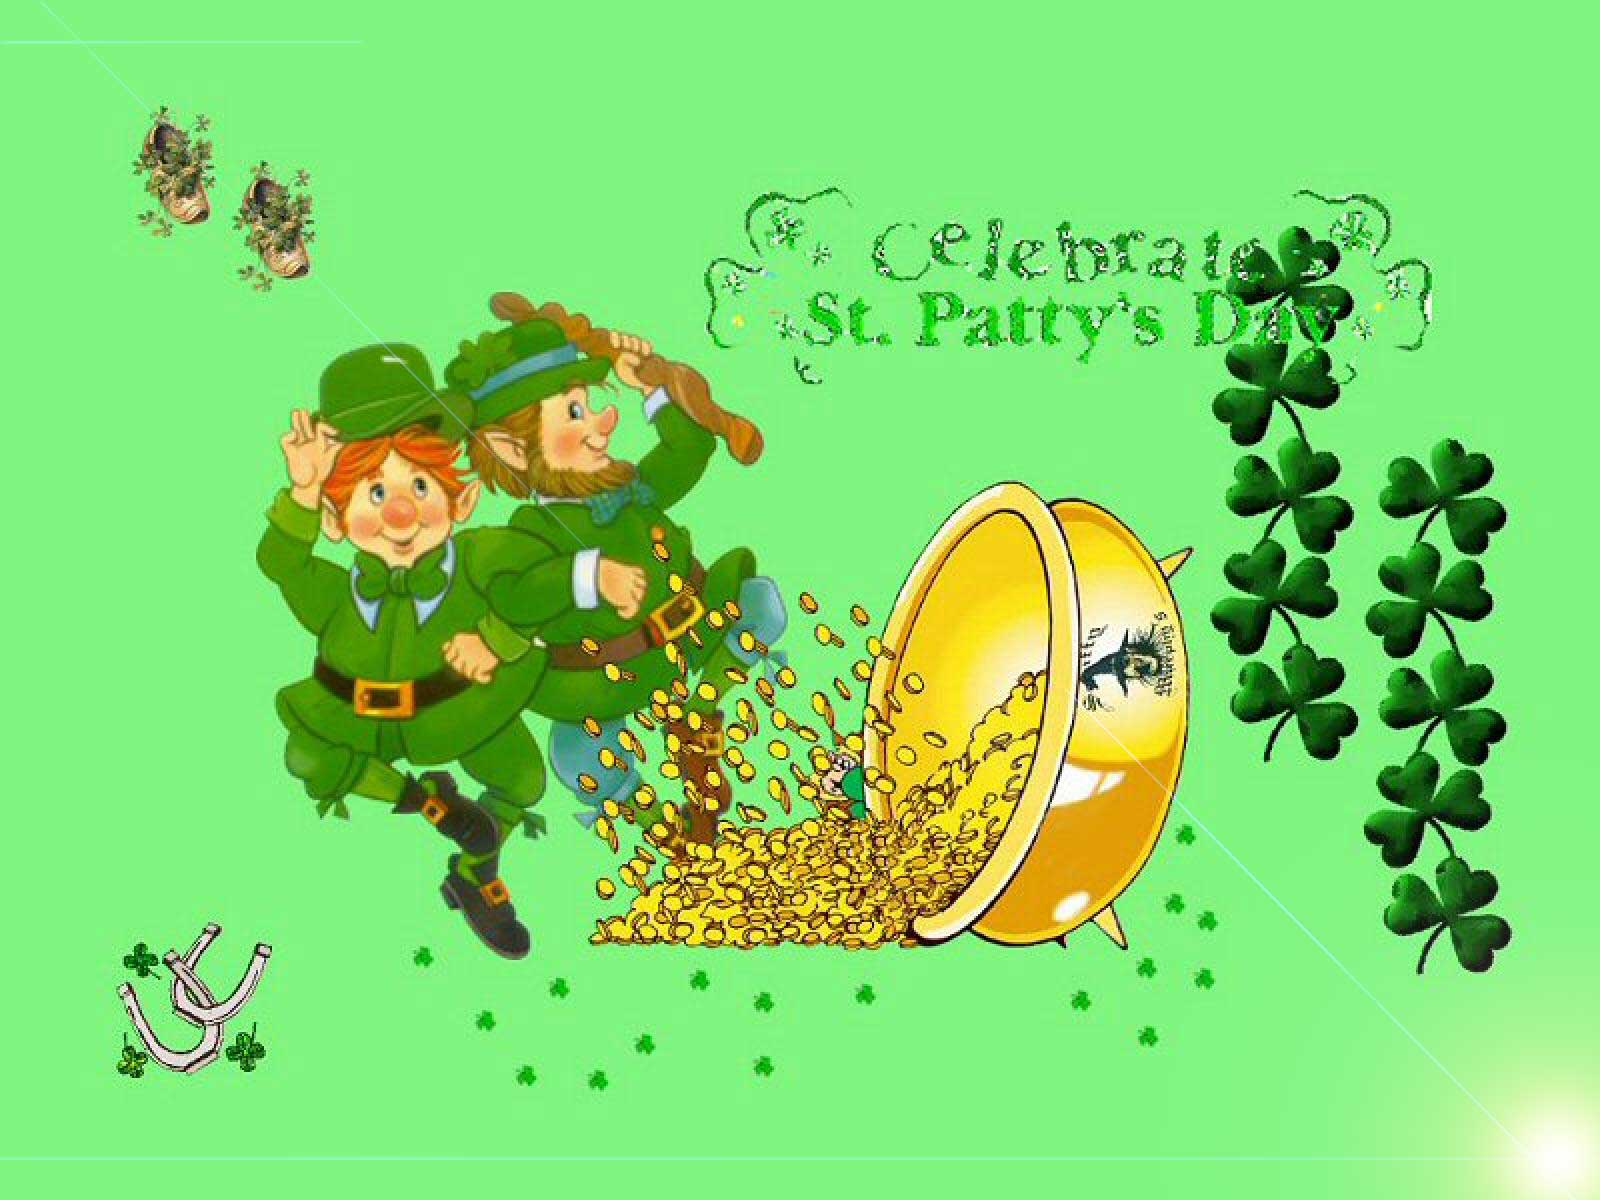 gallery St Patricks Day Greetings WallPapers Fun Gallery Images 1600x1200